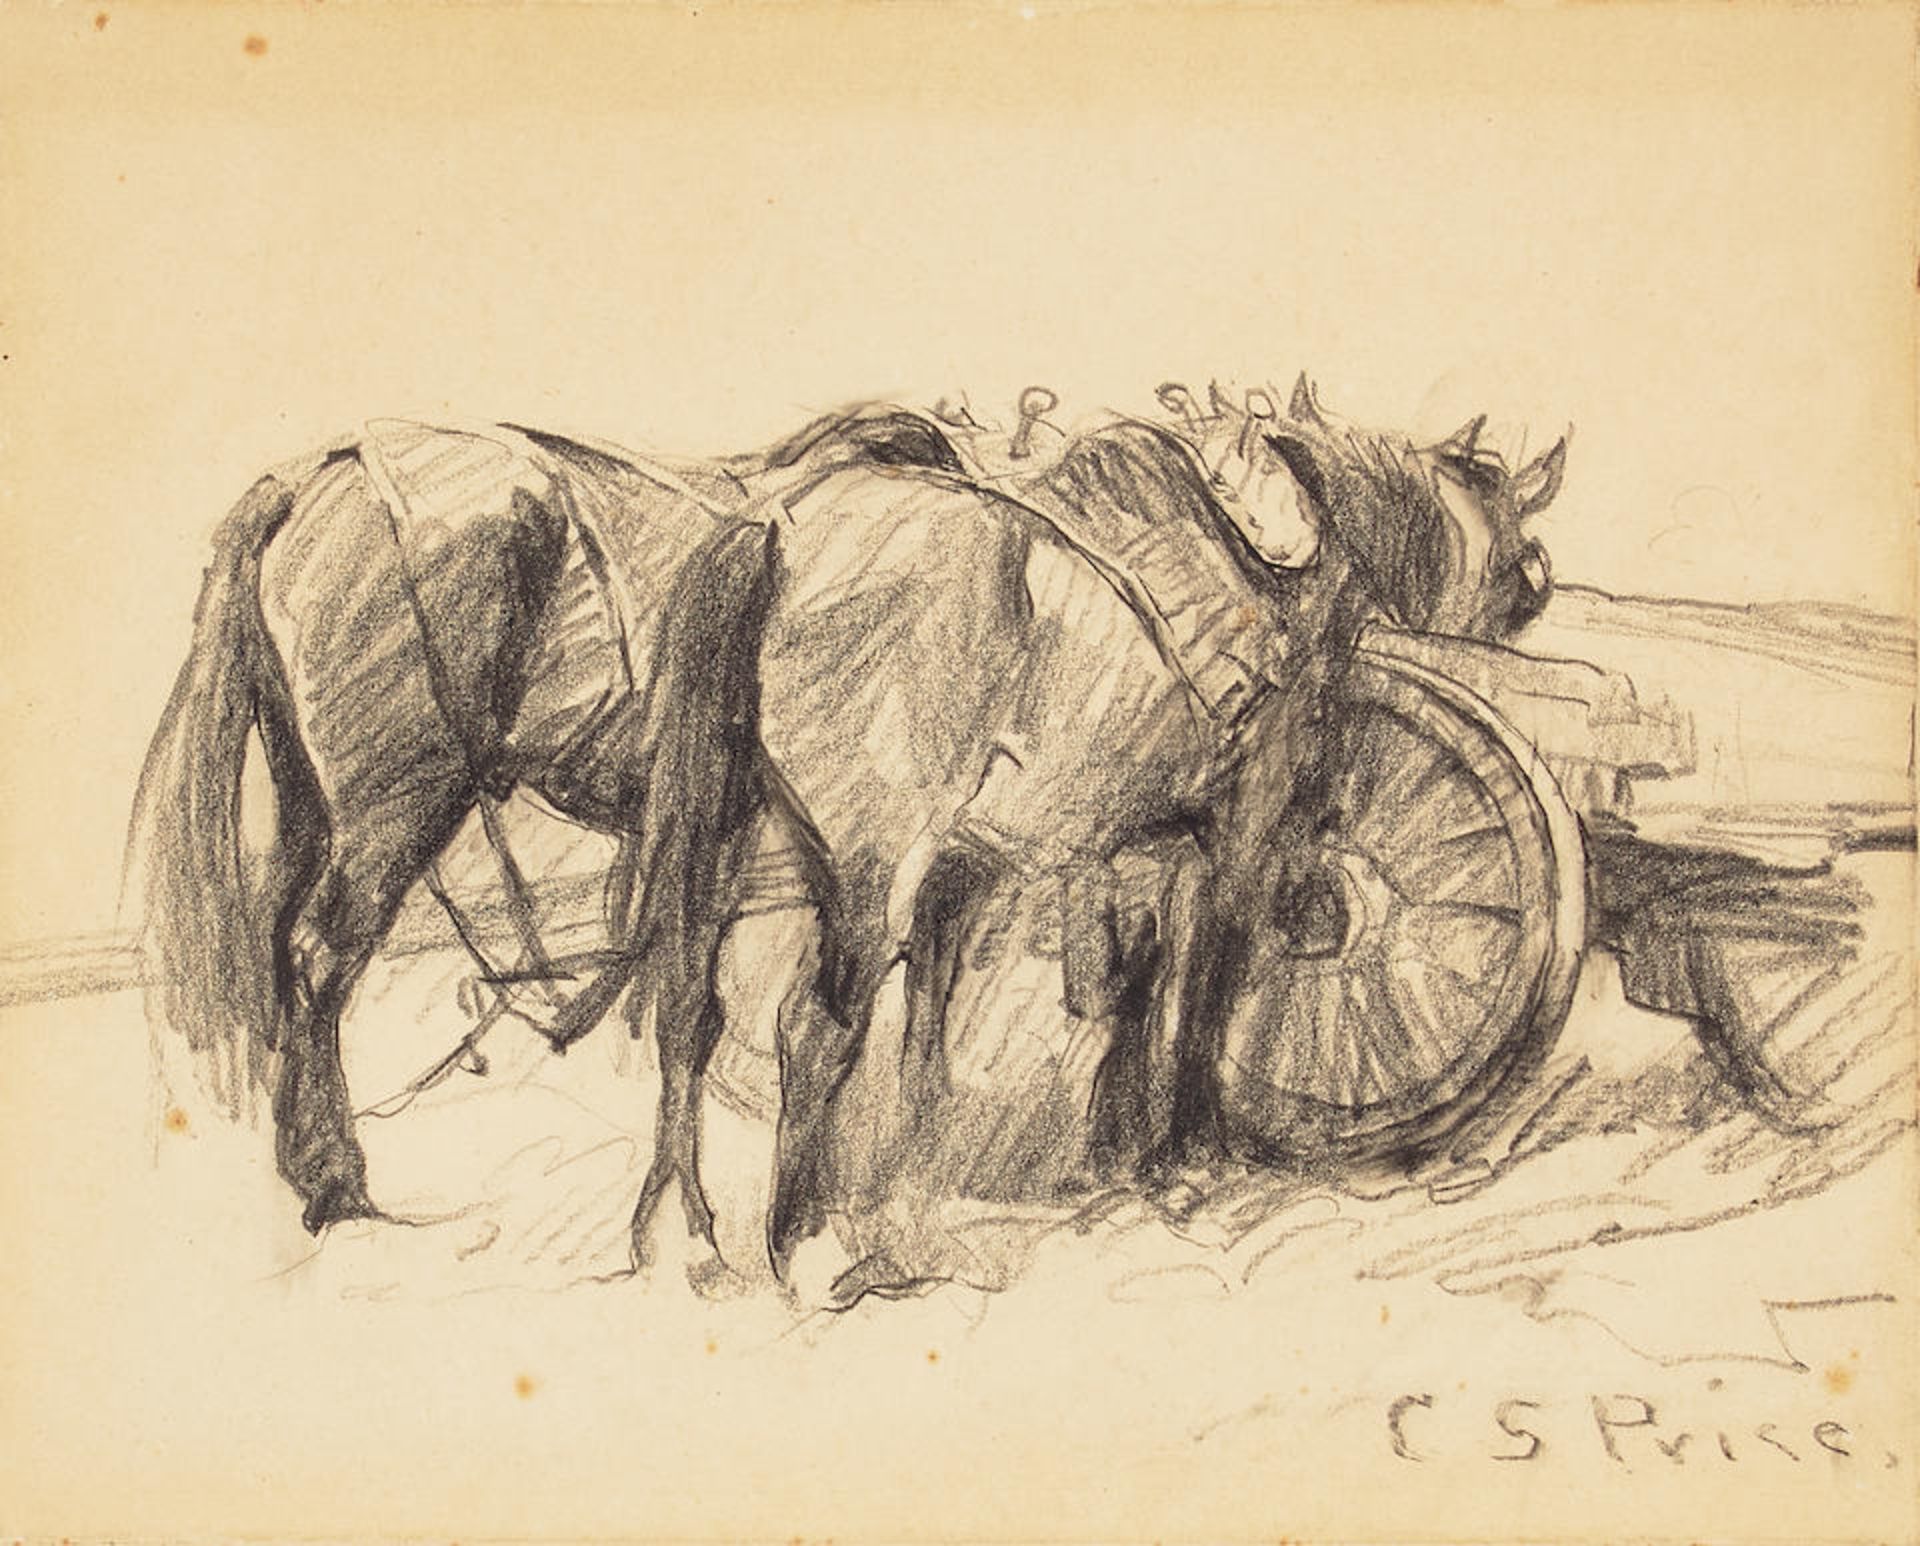 Clayton S. Price (1874-1950) Two Horses by a Cart sheet 7 3/4 x 10 in. framed 11 1/2 x 14 1/2 in.